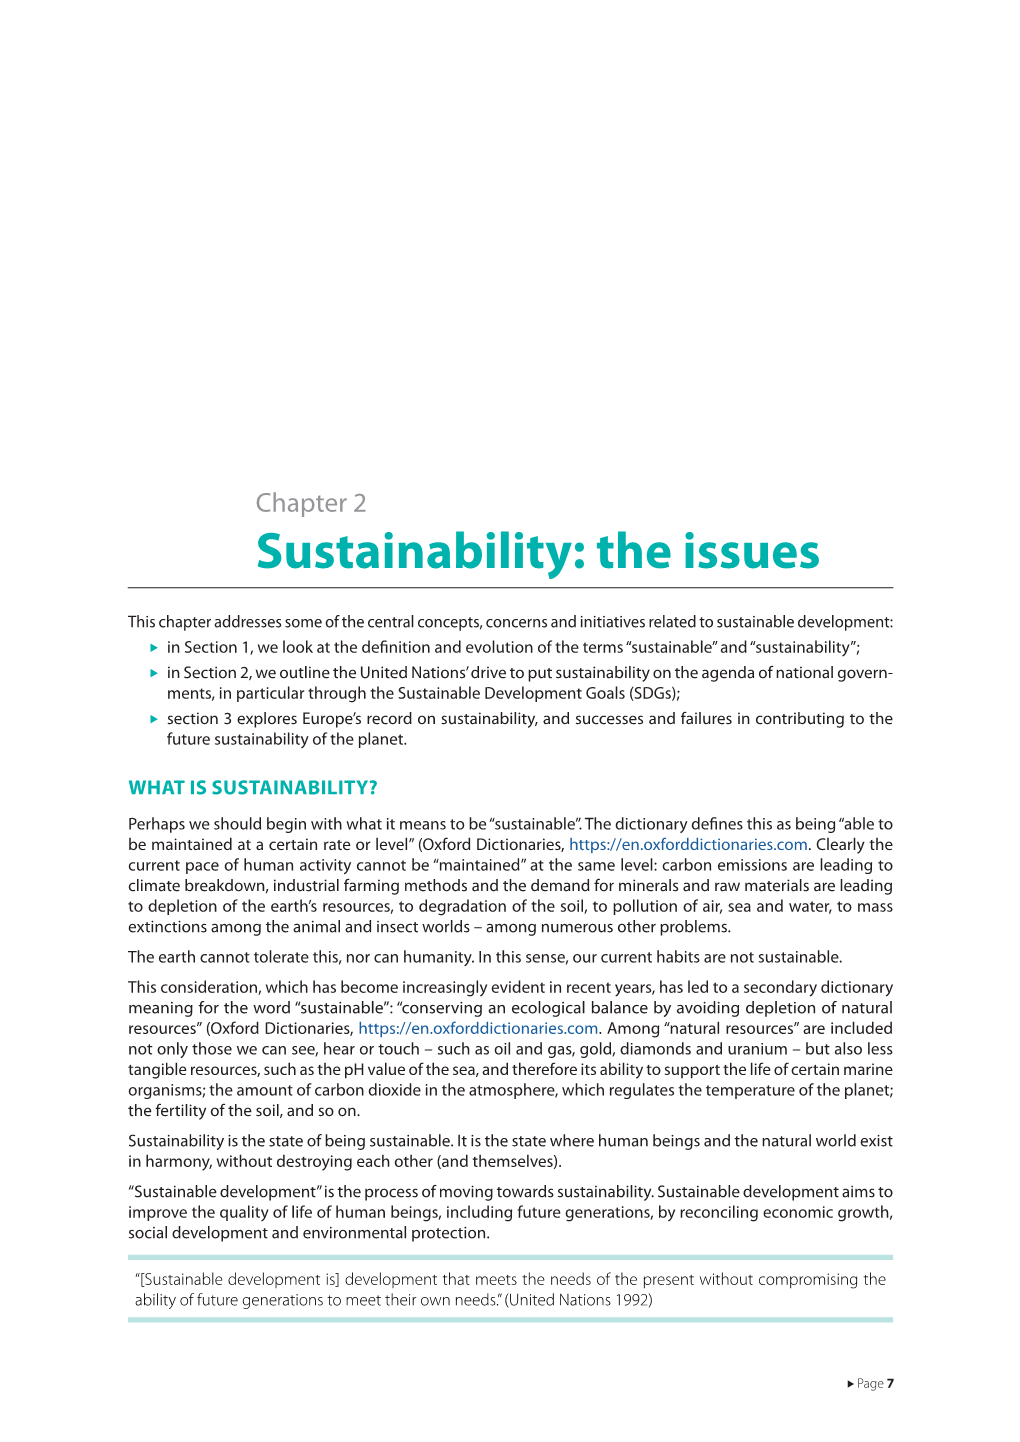 Chapter 2 – Sustainability: the Issues